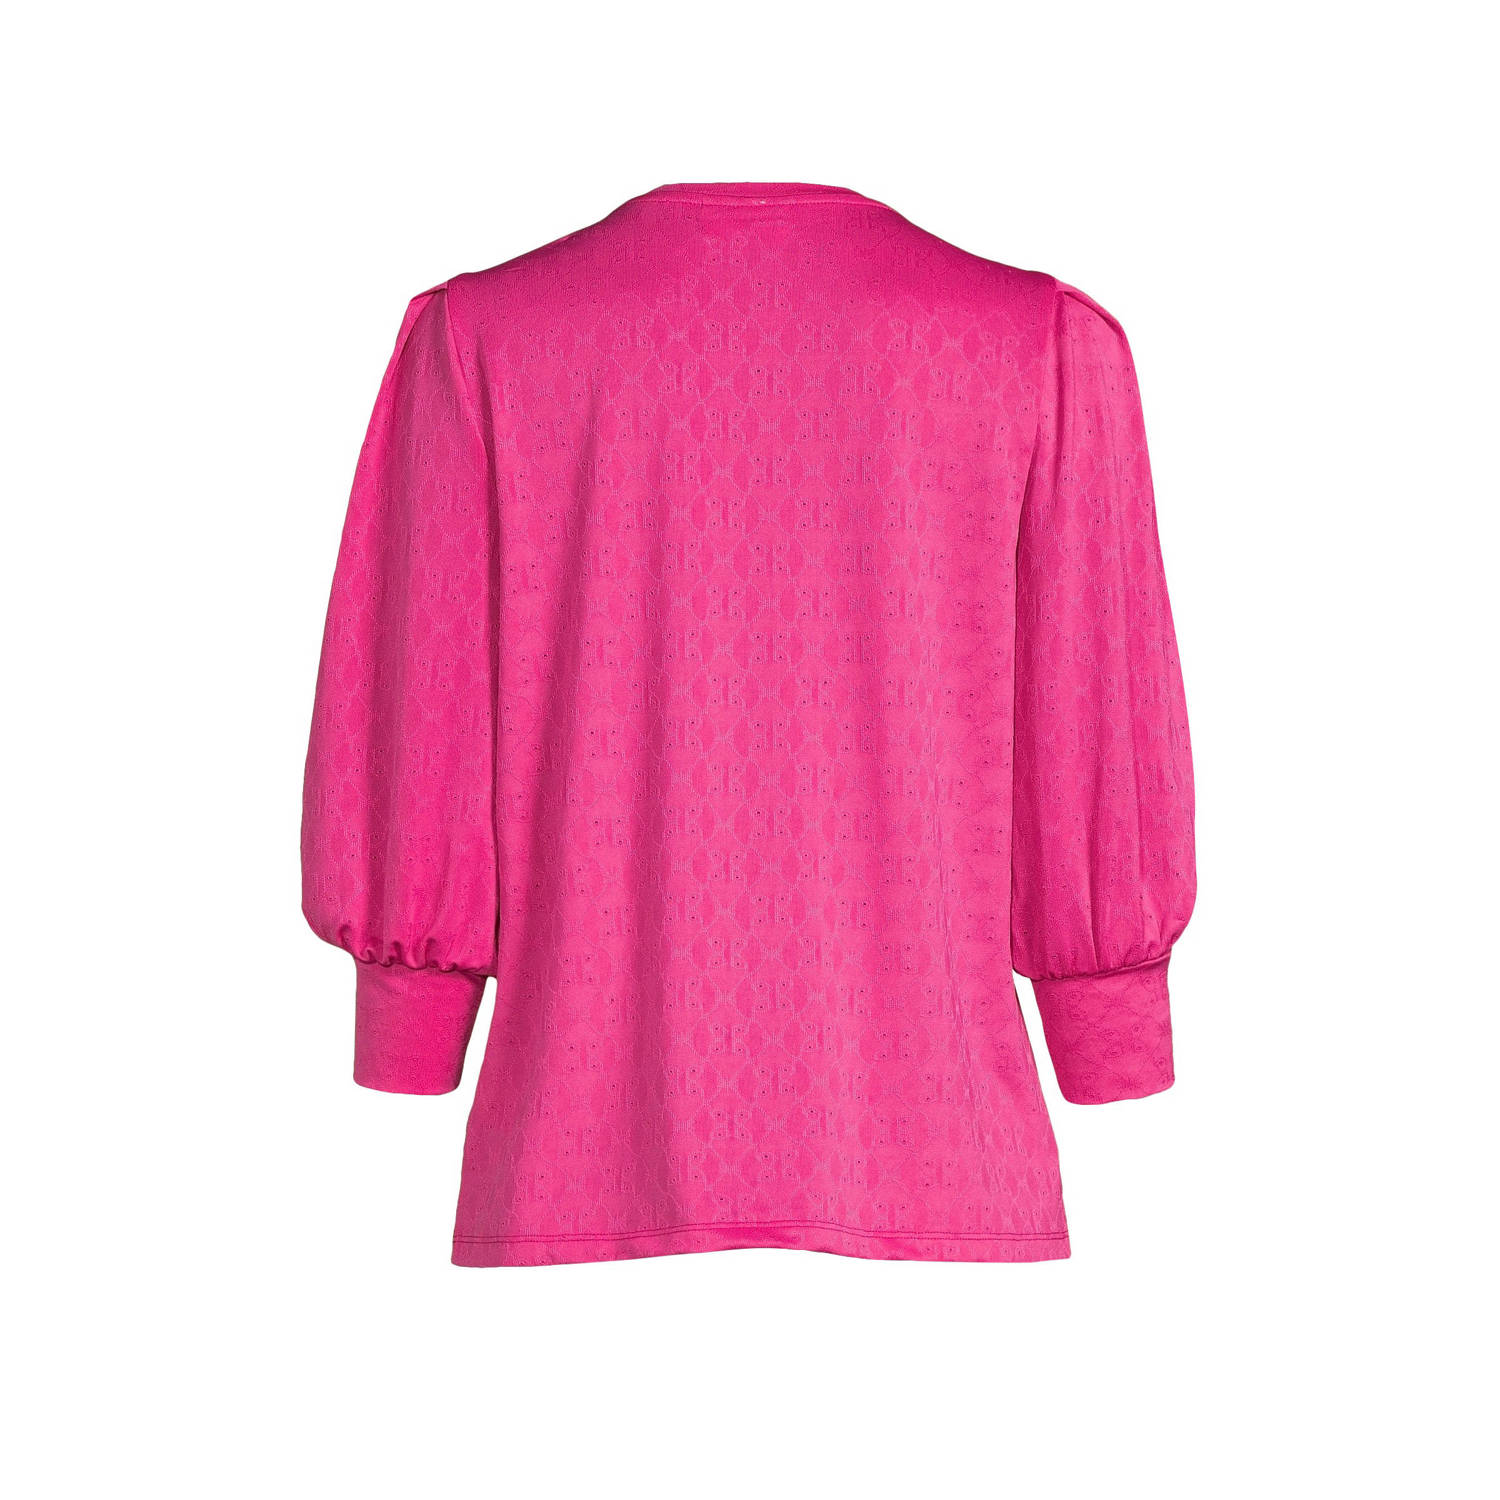 FREEQUENT top roze